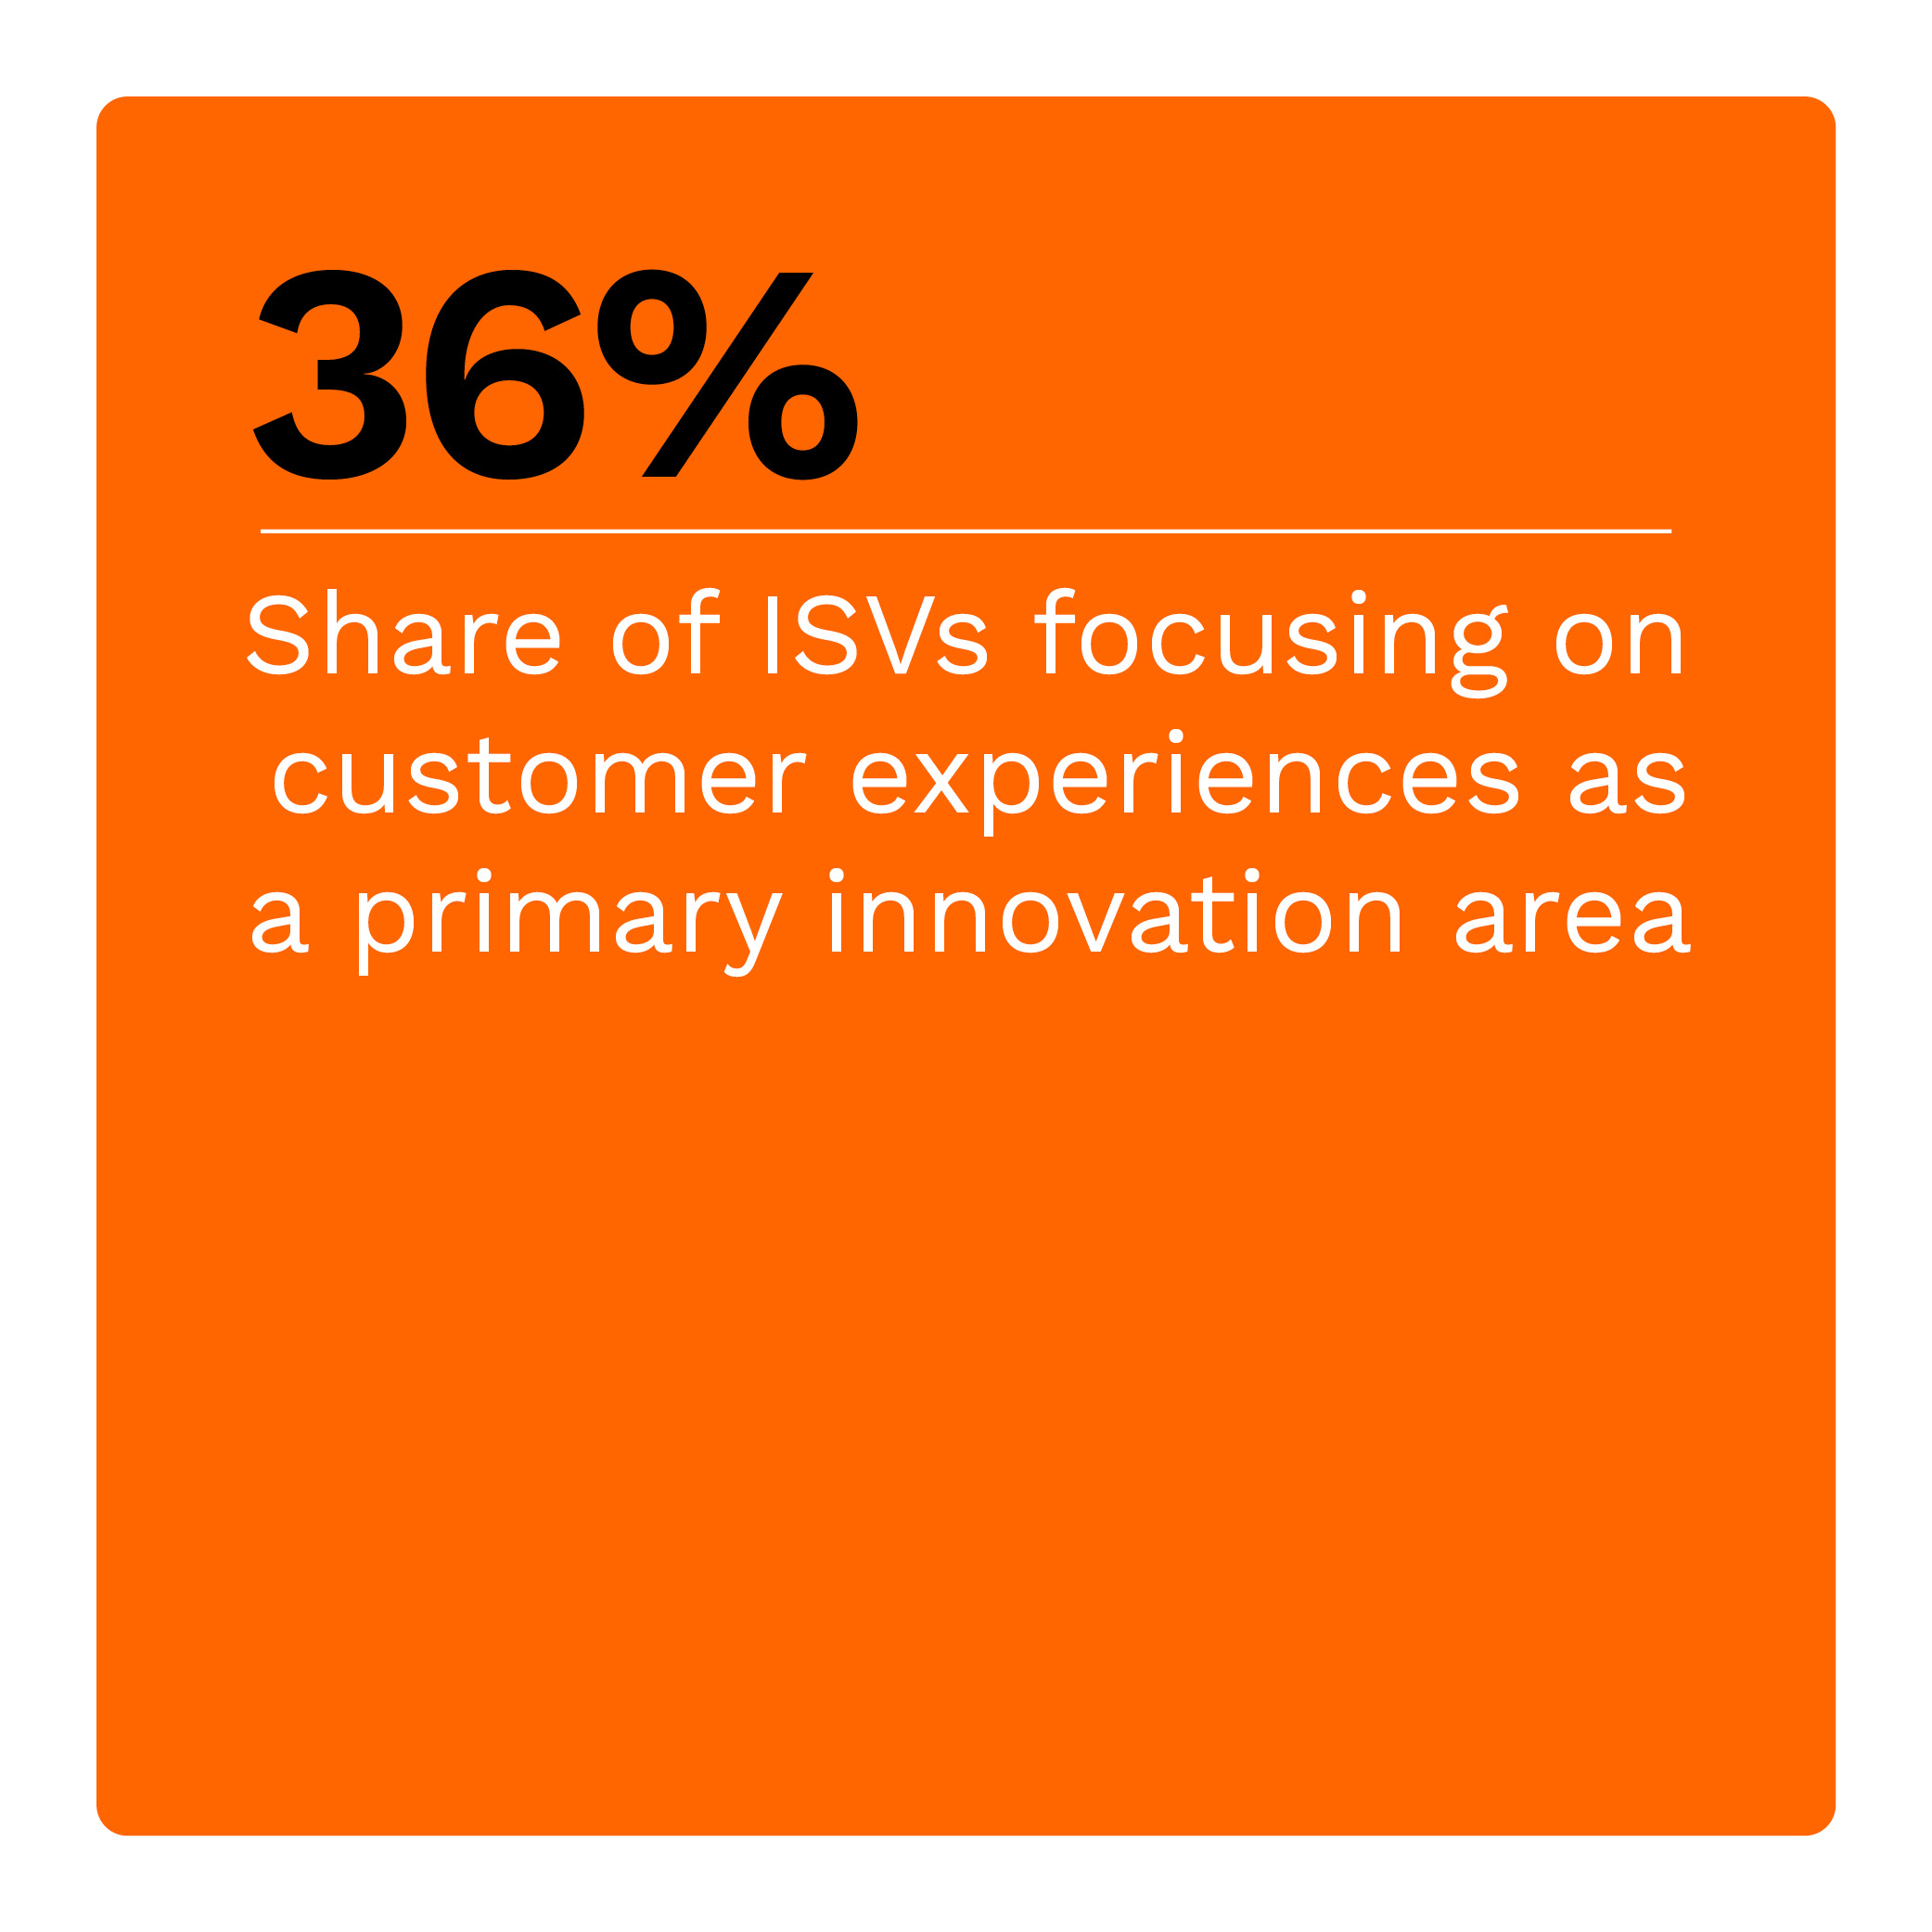 36%: Share of ISVs focusing on customer experiences as a primary innovation area